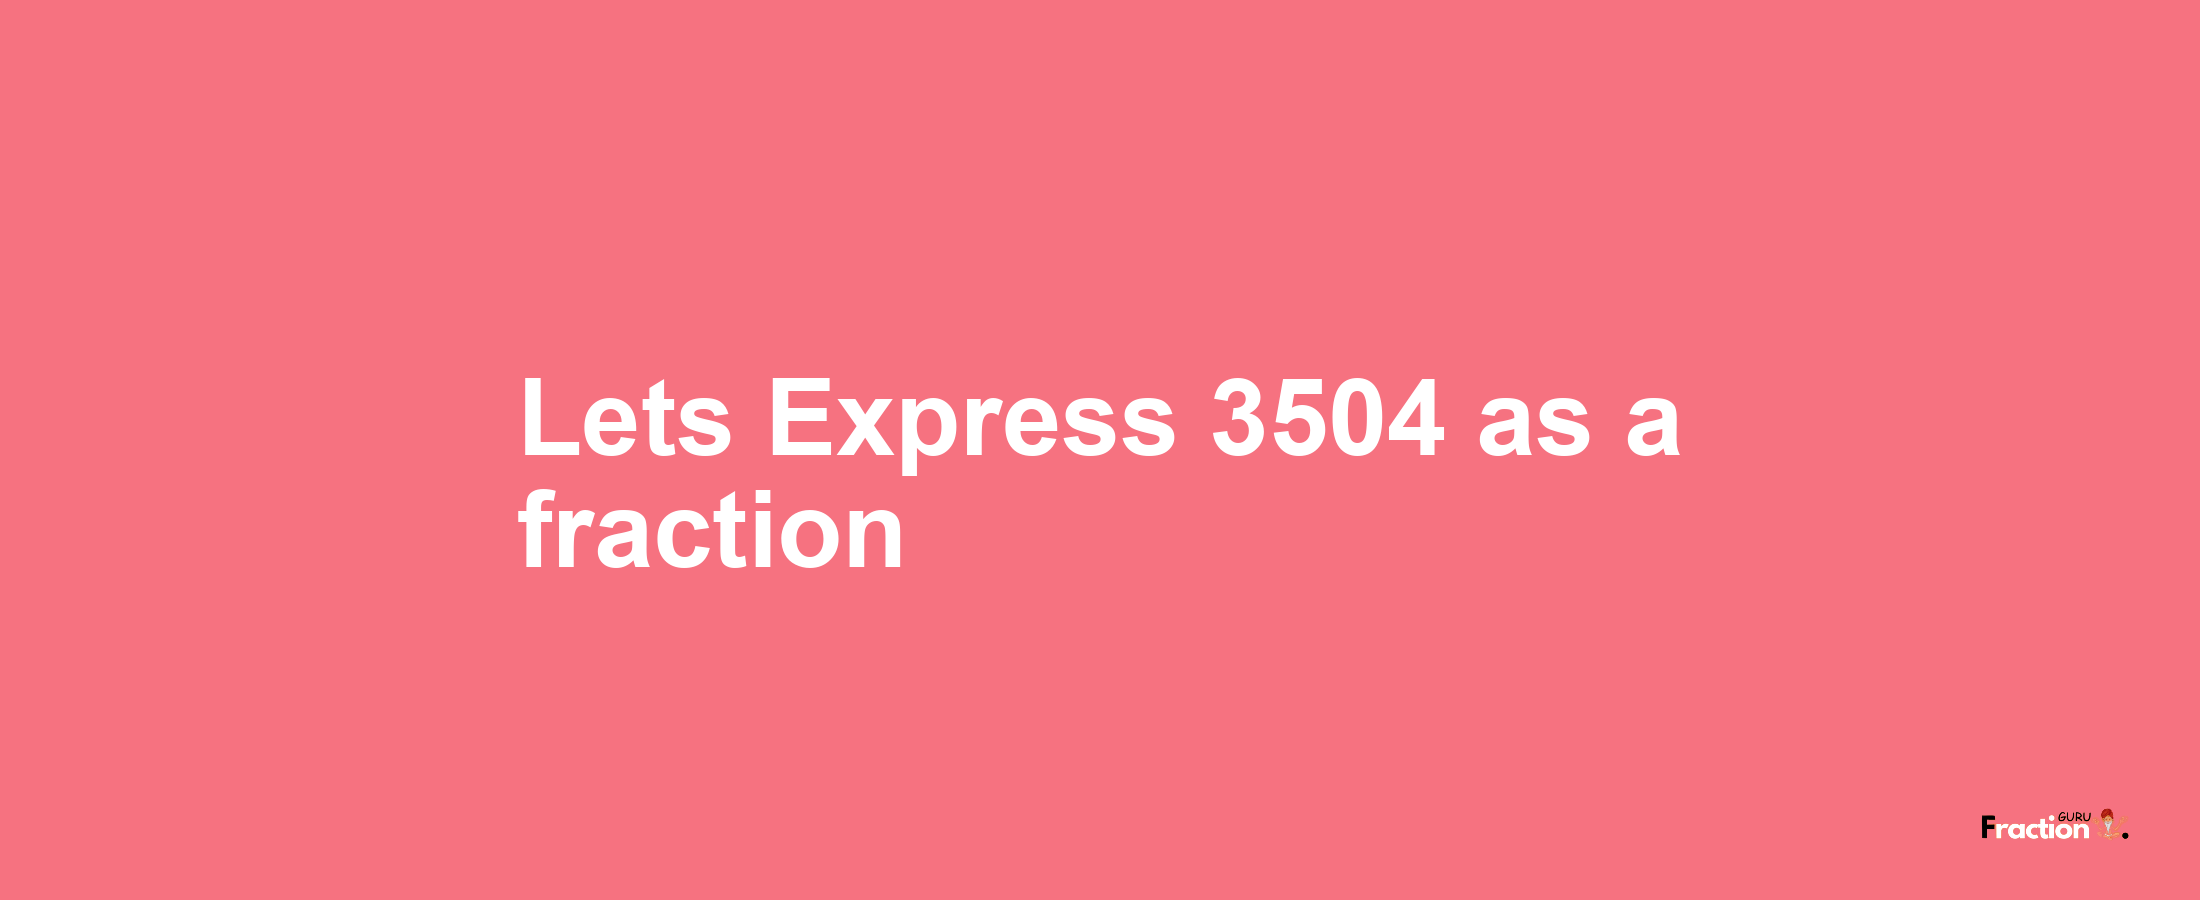 Lets Express 3504 as afraction